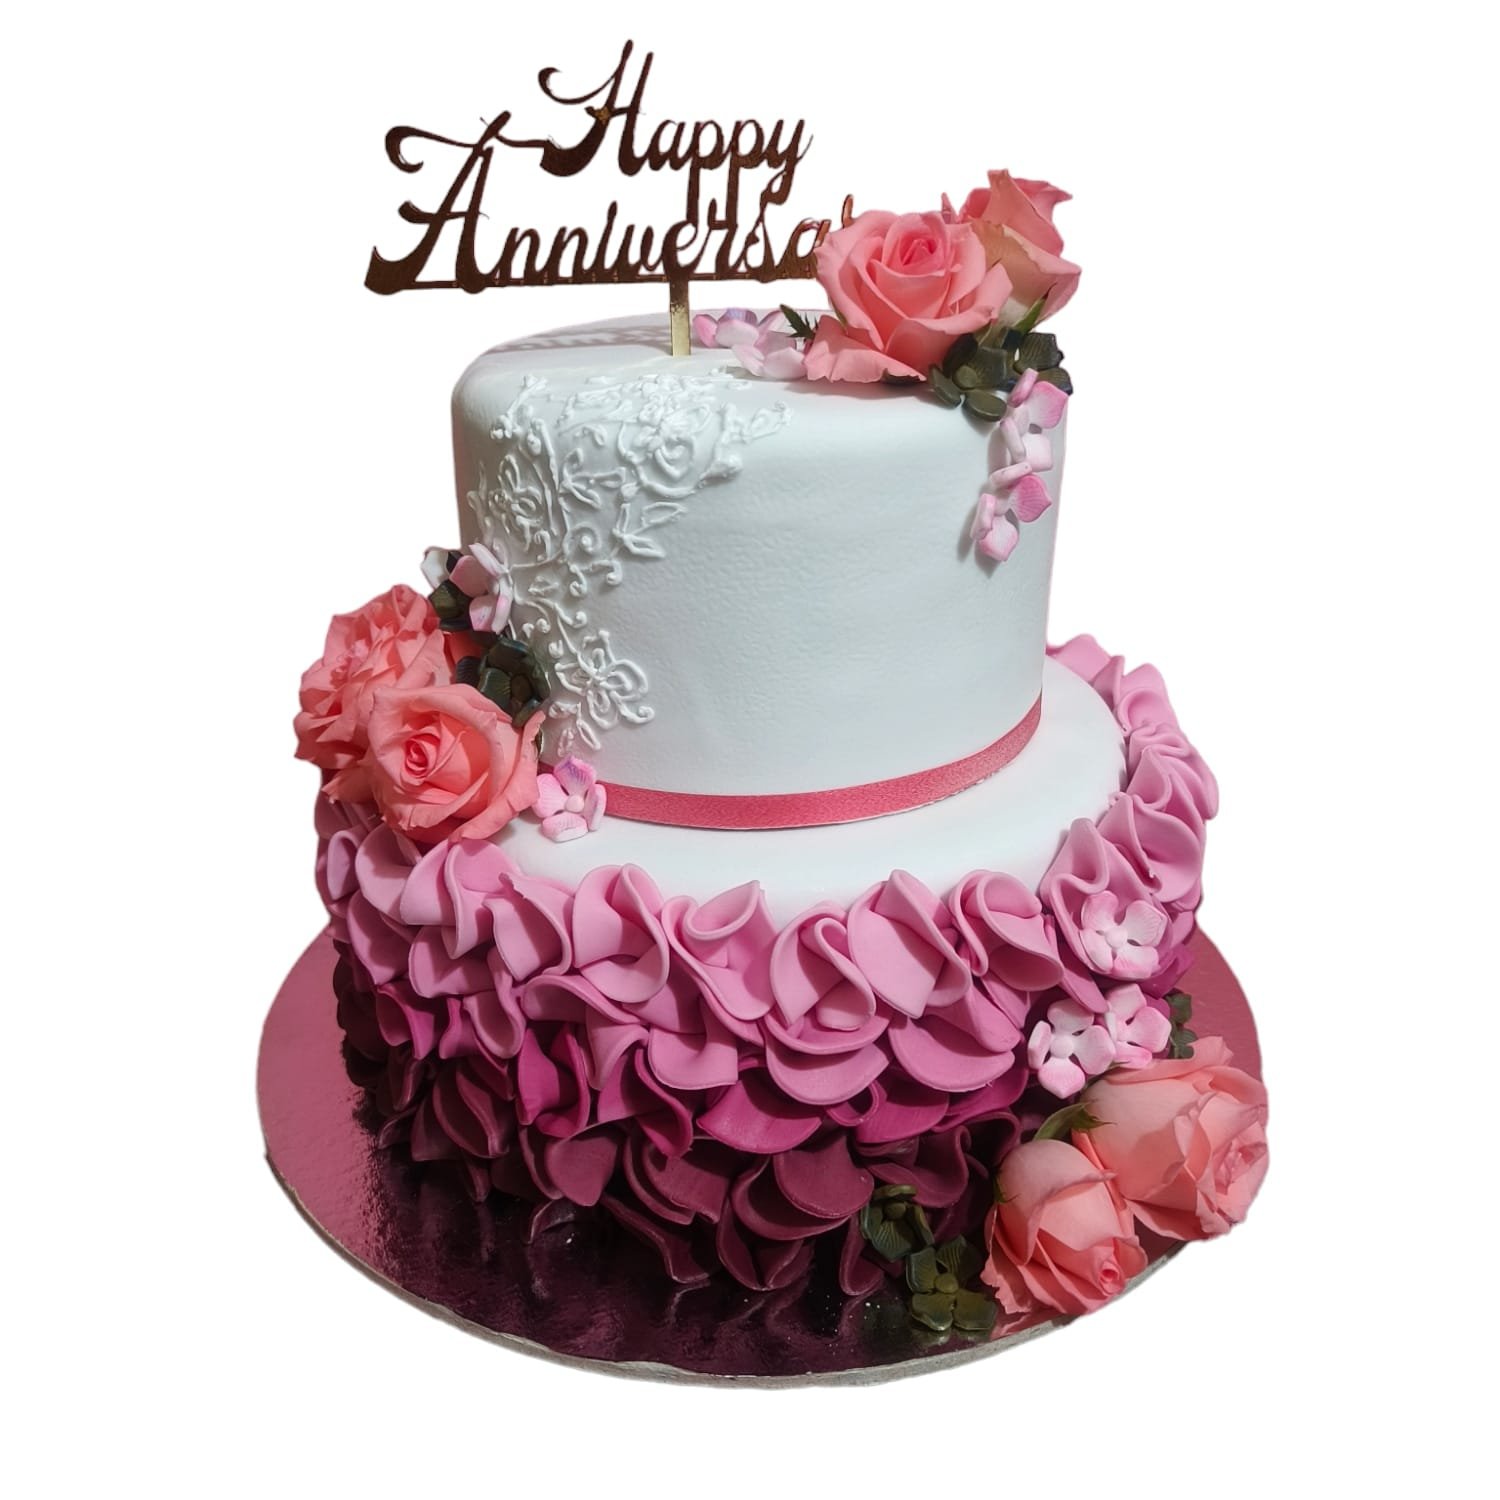 Buy/Send 50th Two Tier Anniversary Cake Online - OyeGifts